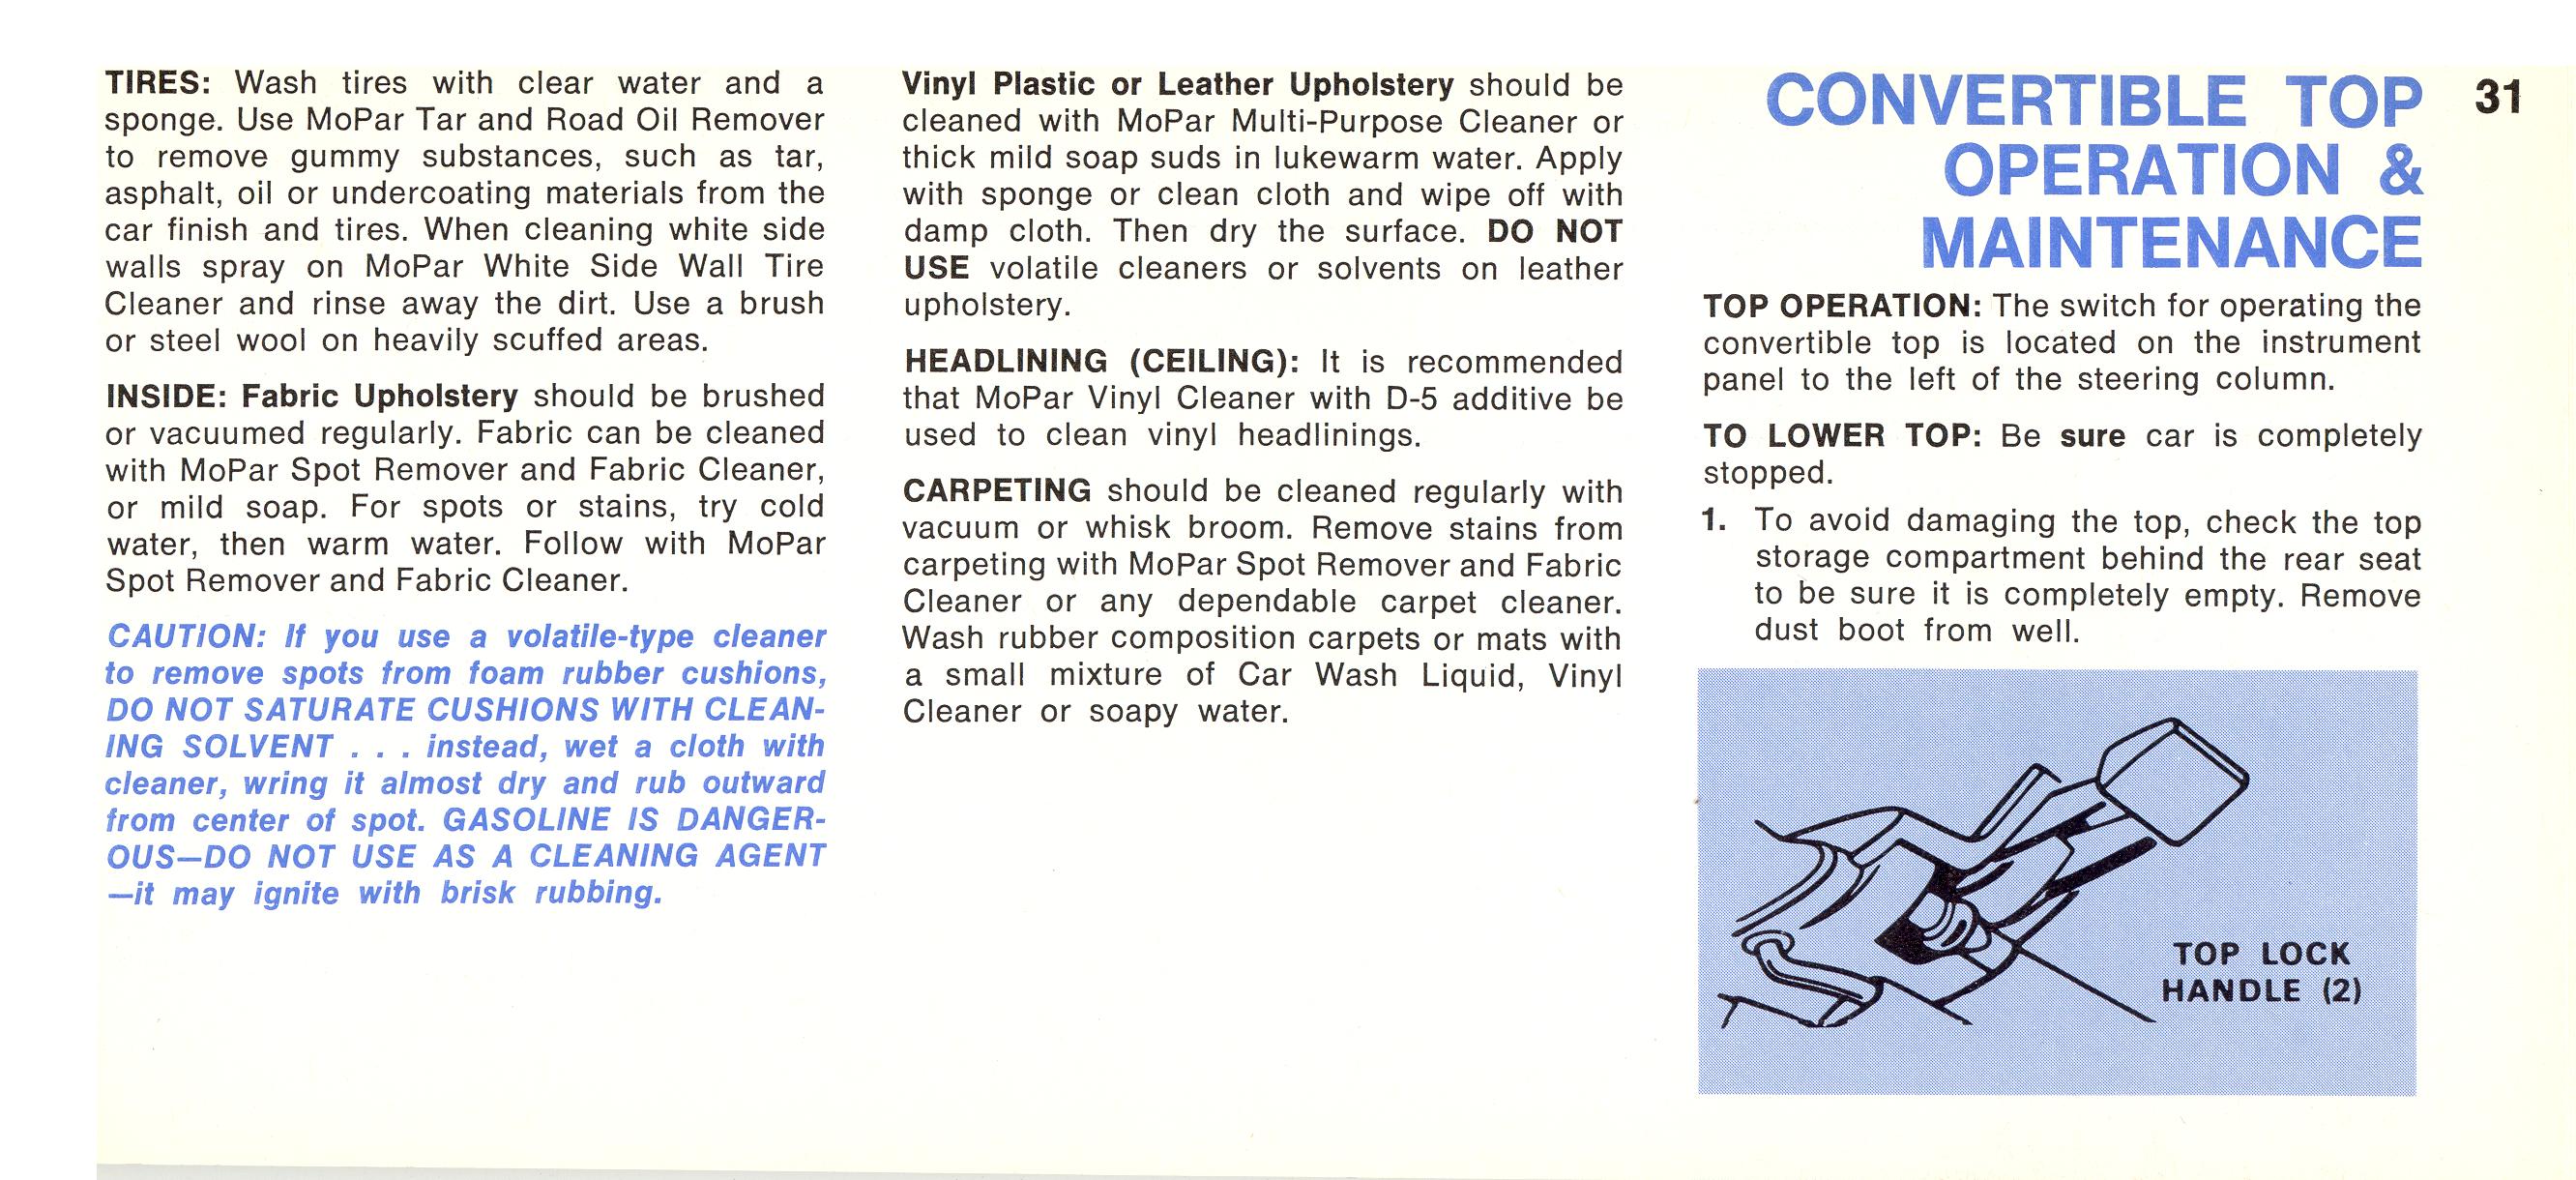 1968 Chrysler Imperial Owners Manual Page 4